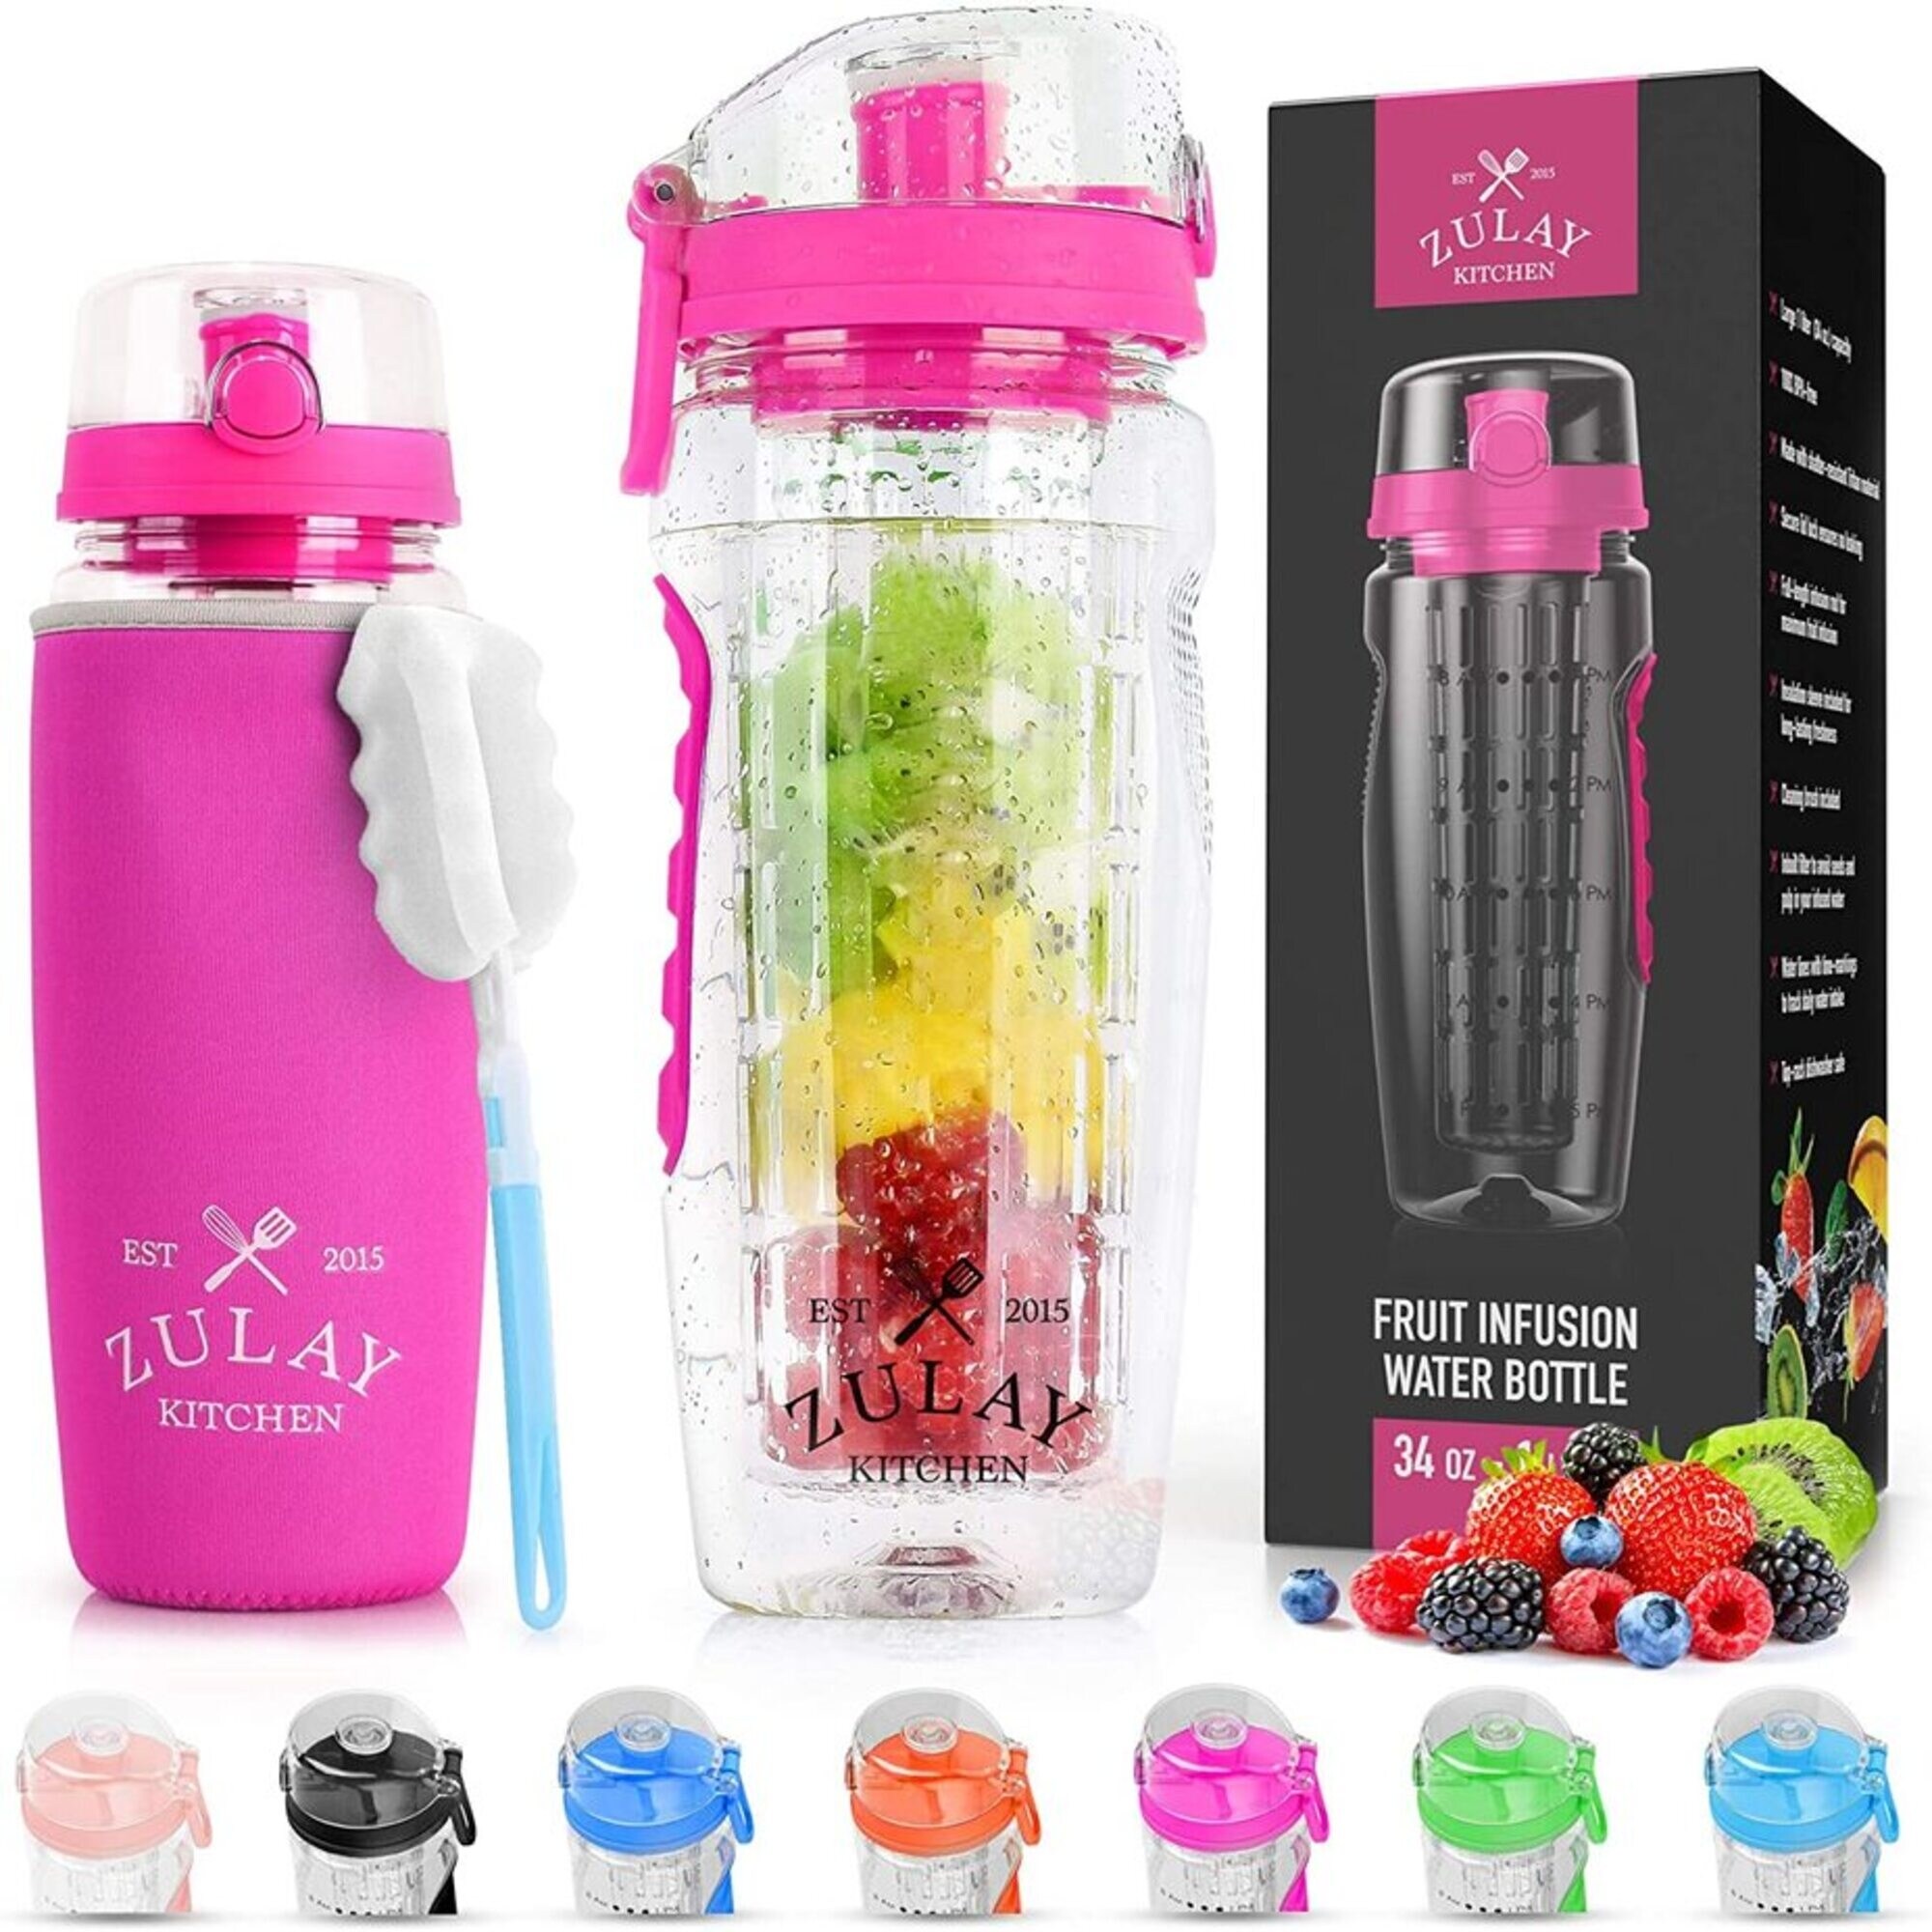 https://ak1.ostkcdn.com/images/products/is/images/direct/e48eeae4f2bdccfd6bdccfa471986c8a73caadfd/Zulay-Water-Bottle-Fruit-Infuser-34oz---Flamingo-Pink---With-Sleeve.jpg